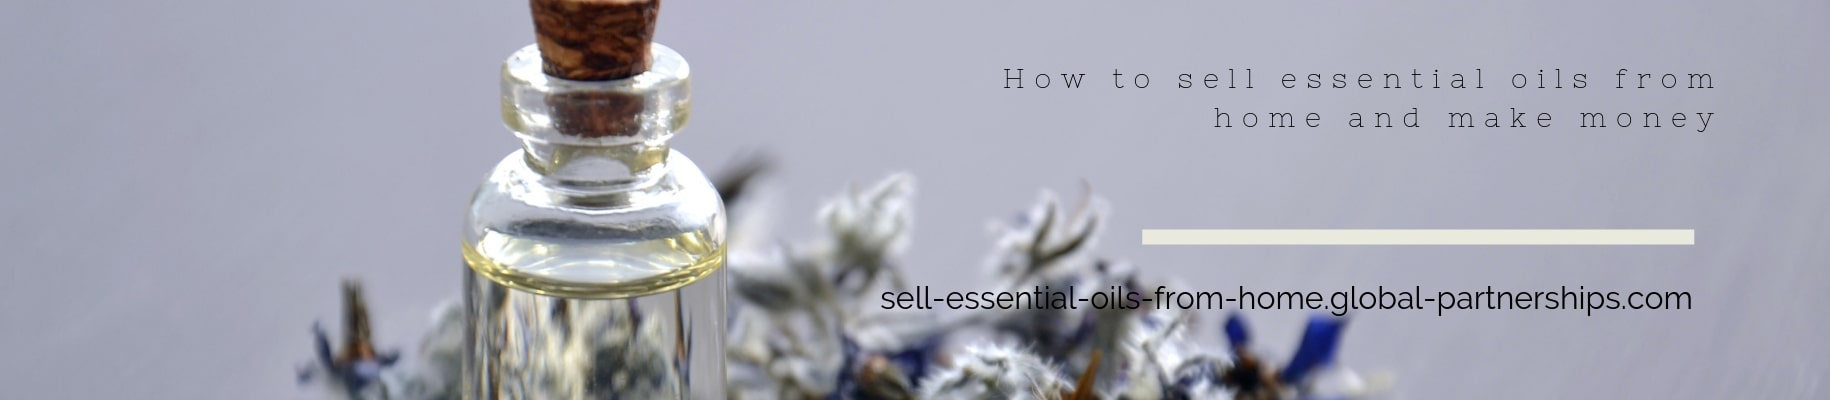 Sell essential oils from home